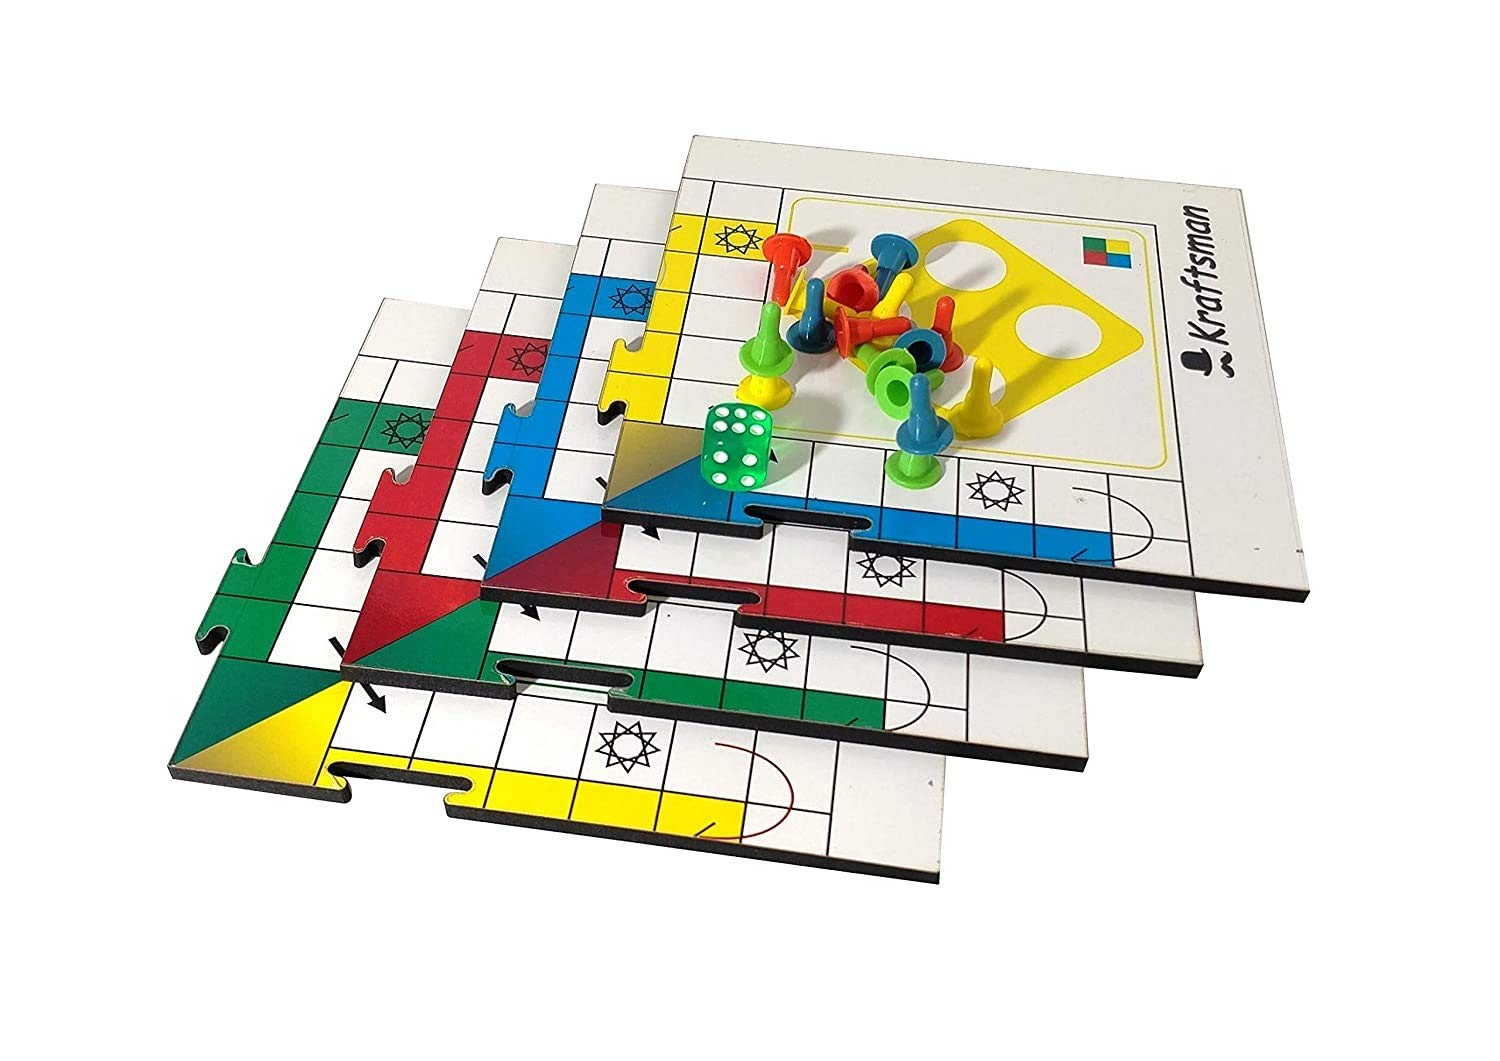 Best Portable wooden board game Easy to carry anywhere you travel, small in size with travel pouch included to safe guard the objects to get lost Develops logical thinking and curiosity development and makes a awesome gift for kids & Adults and Return Gifting Good Quality Best option for Gift 1